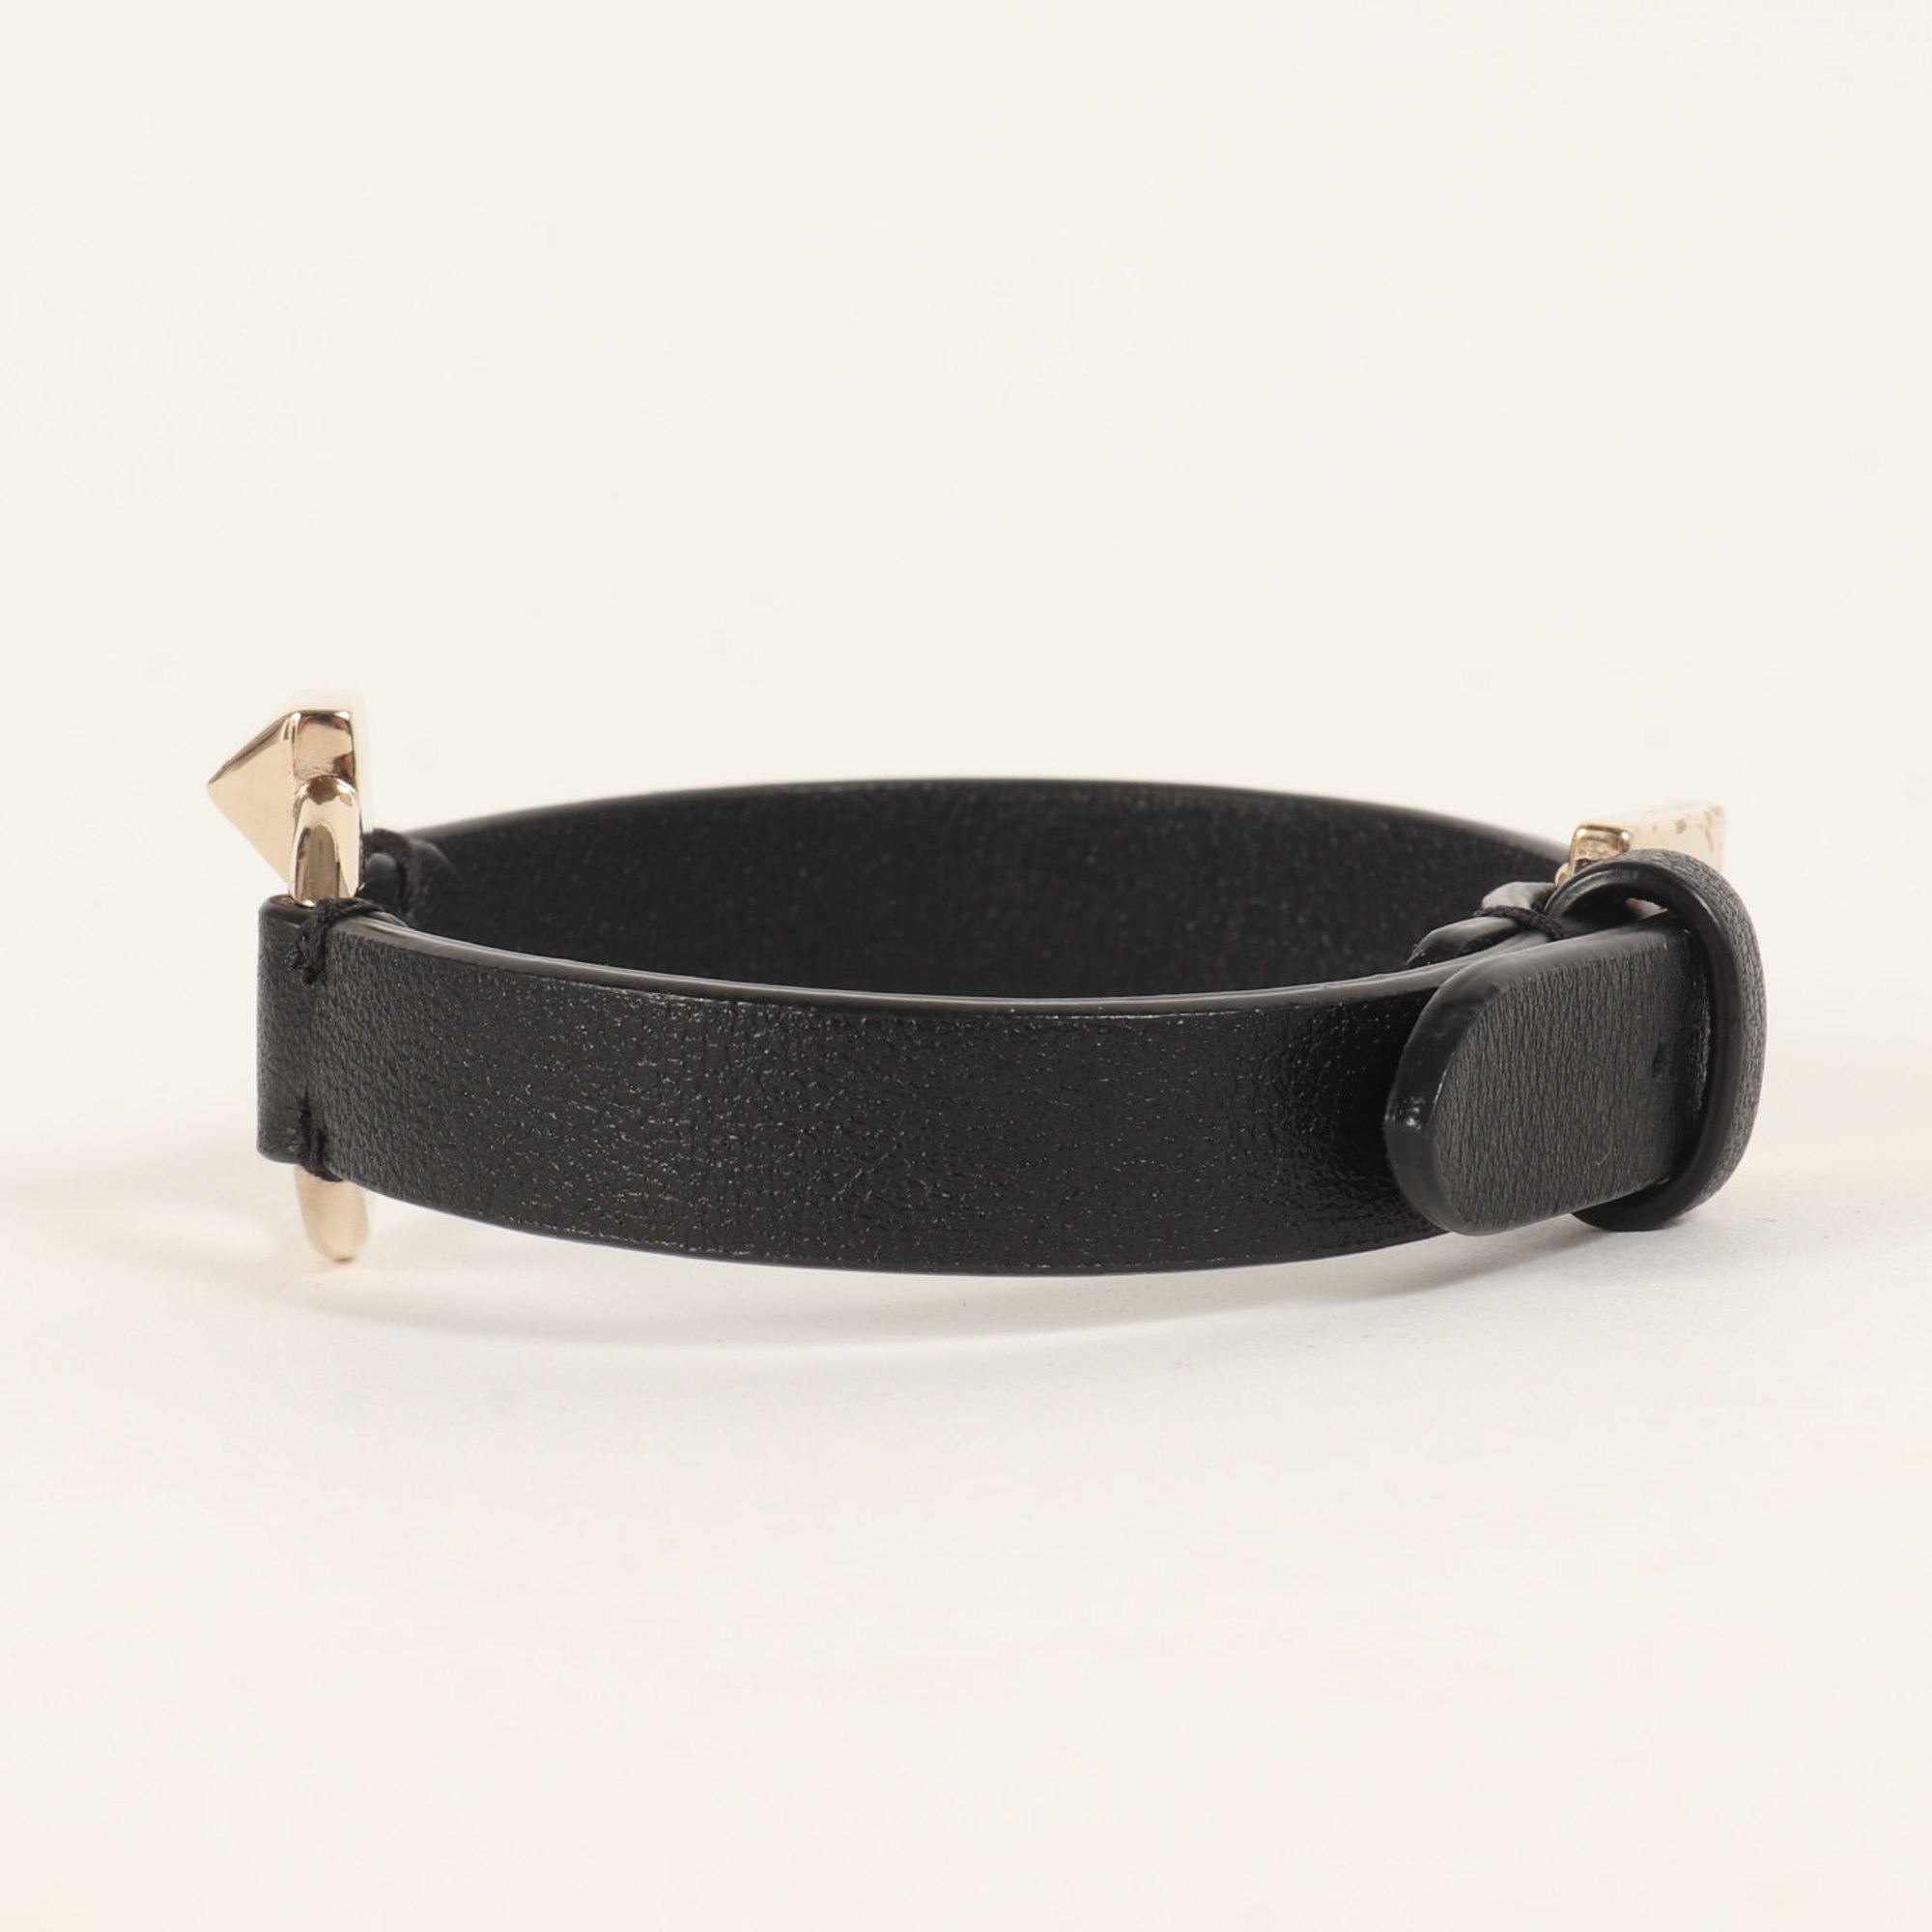 VALENTINO Metal Pyramid Studs Leather Combination Bracelet Black Gold Made in Italy Accessories Jewelry